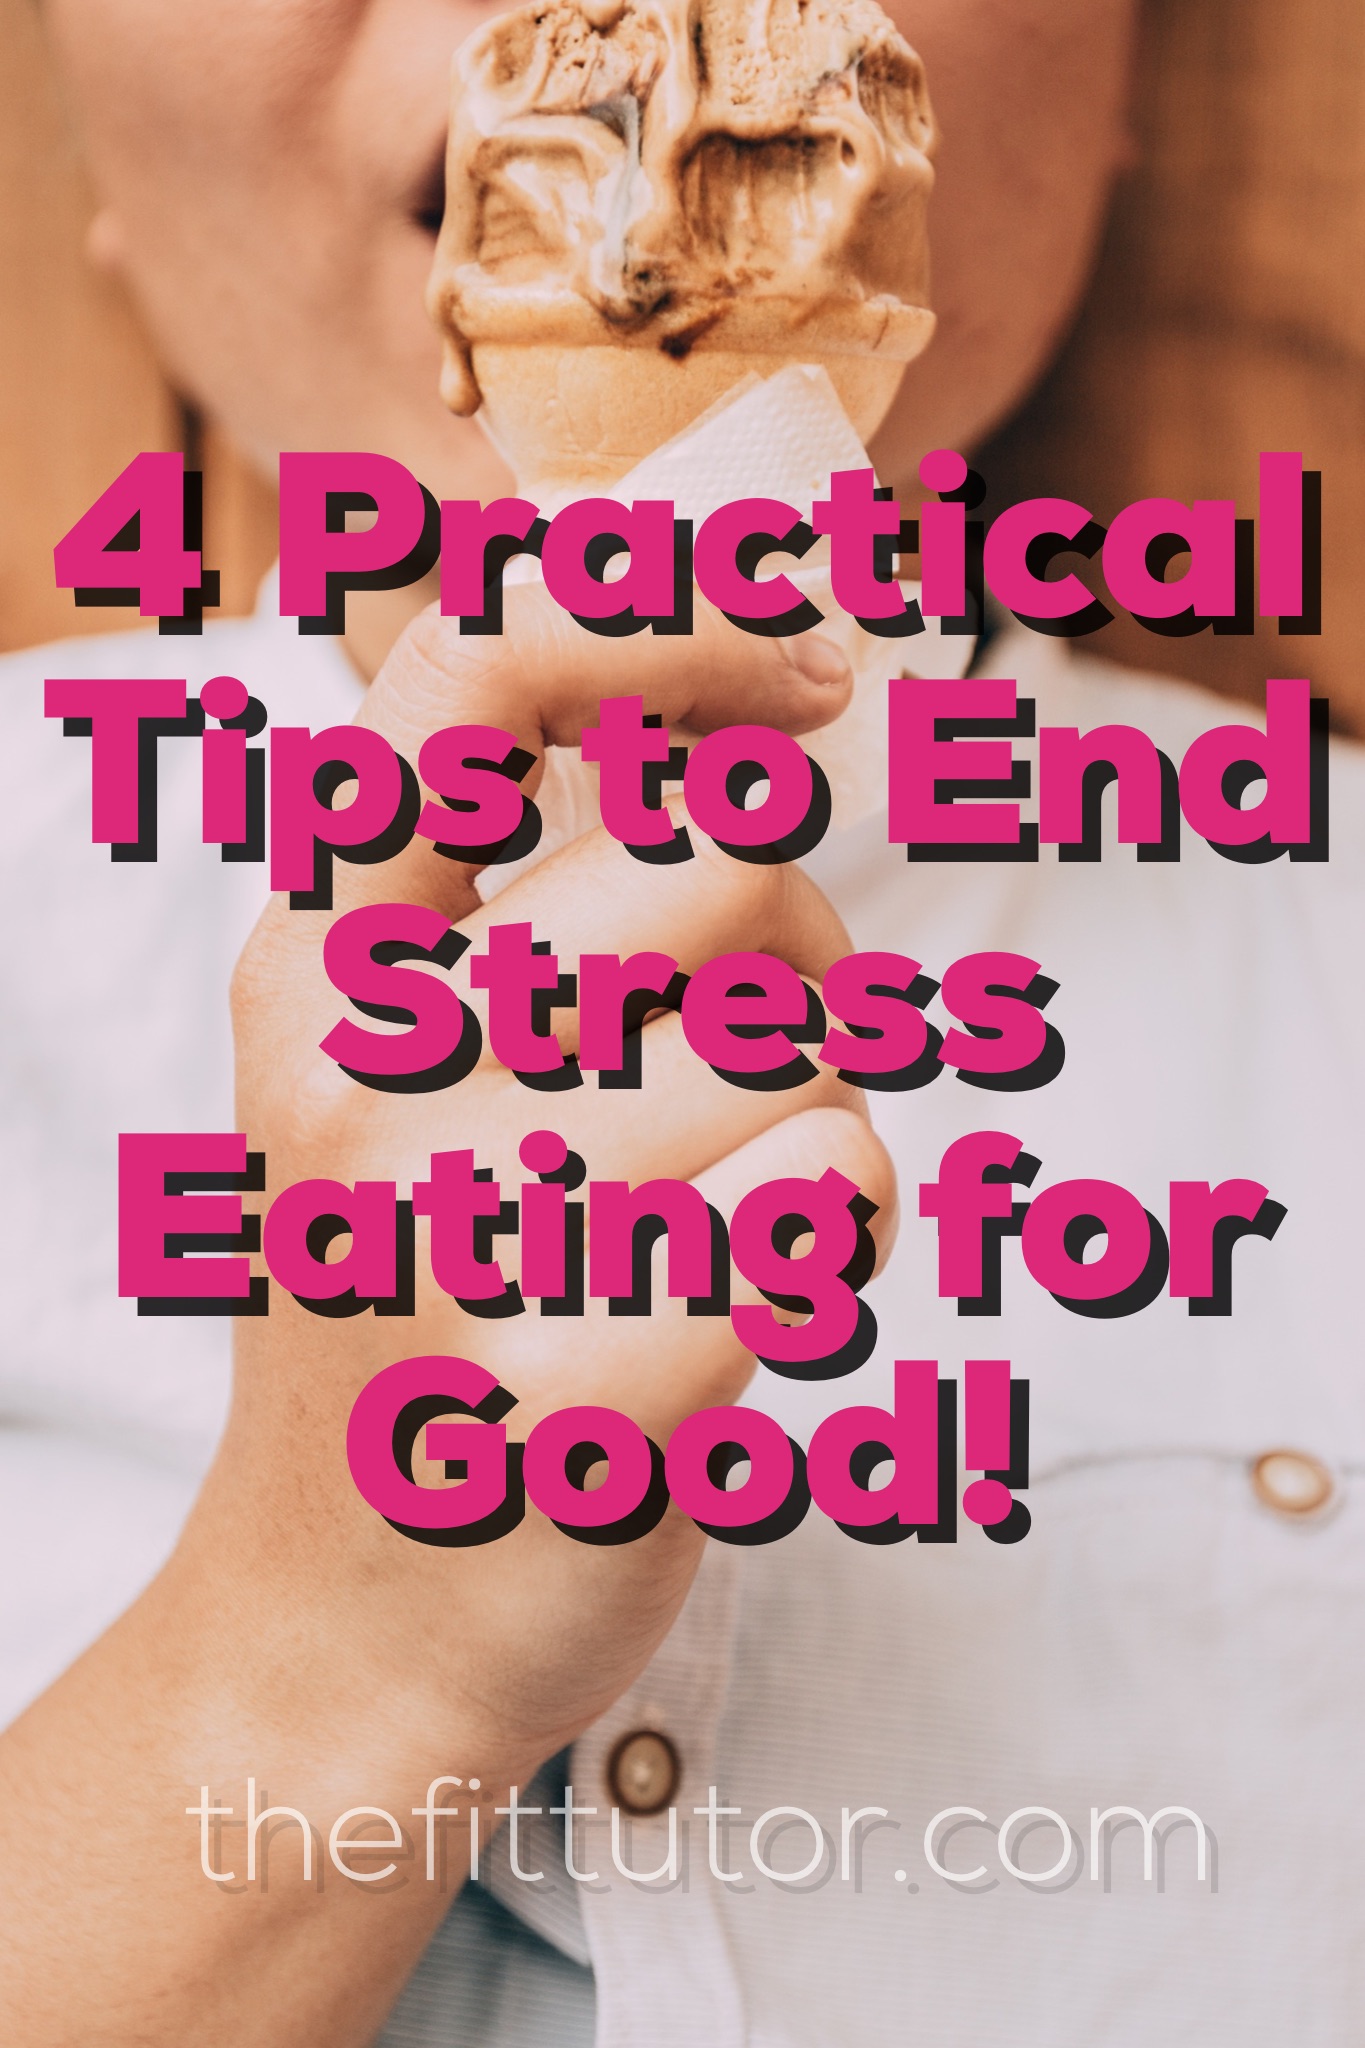 4 practical tips for fighting stress eating that you can start NOW